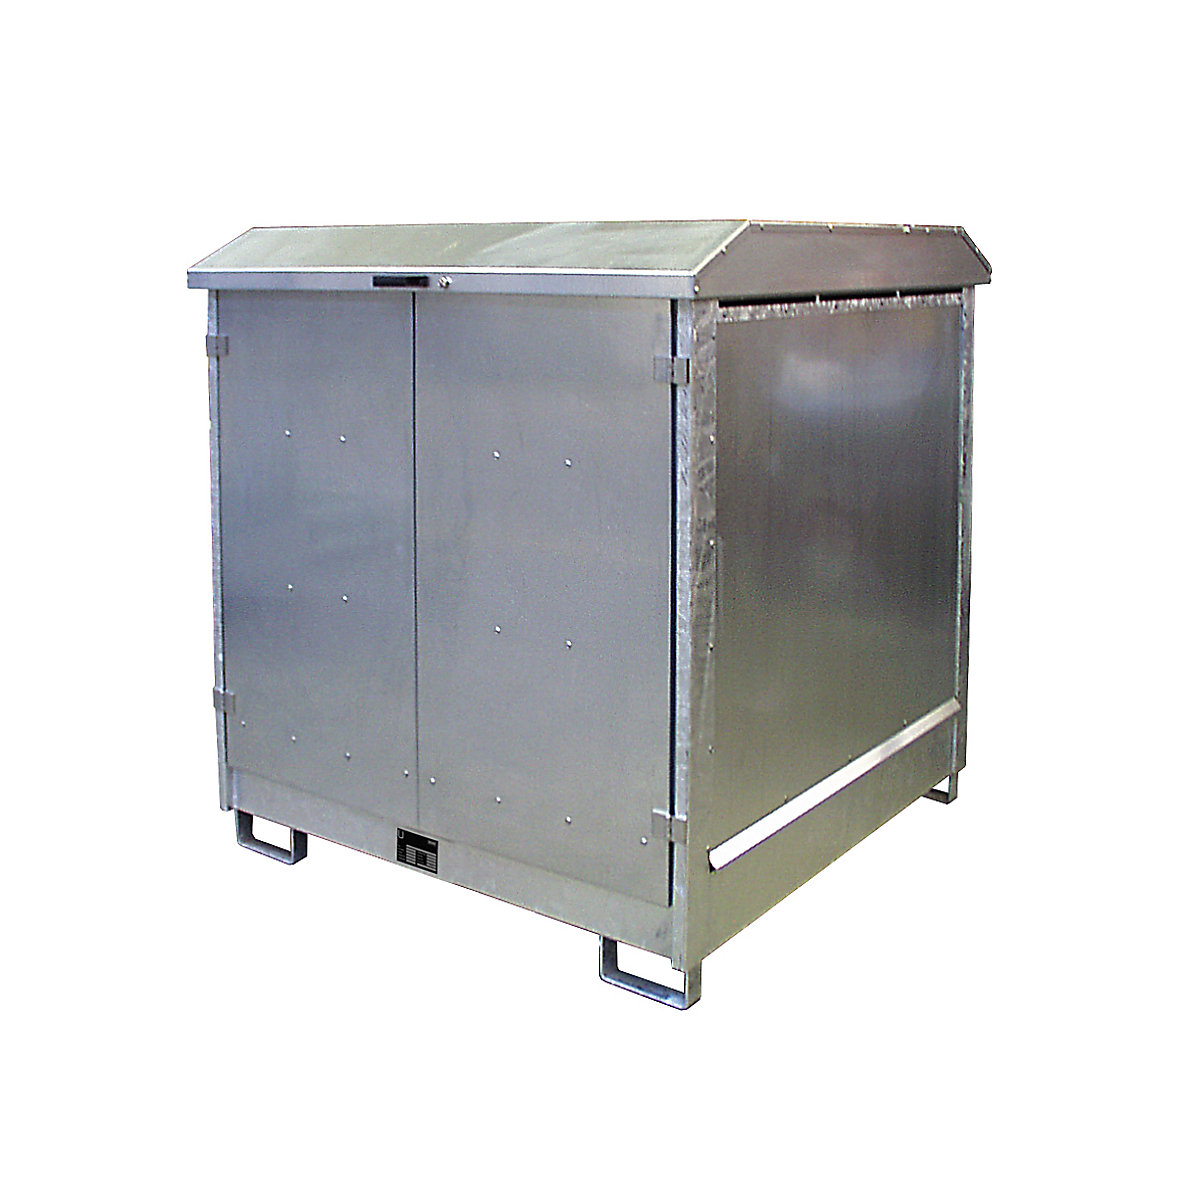 EUROKRAFTpro – Hazardous goods storage unit, with 2 hinged doors and forklift pockets, for 4 x 200 litre drums, zinc plated